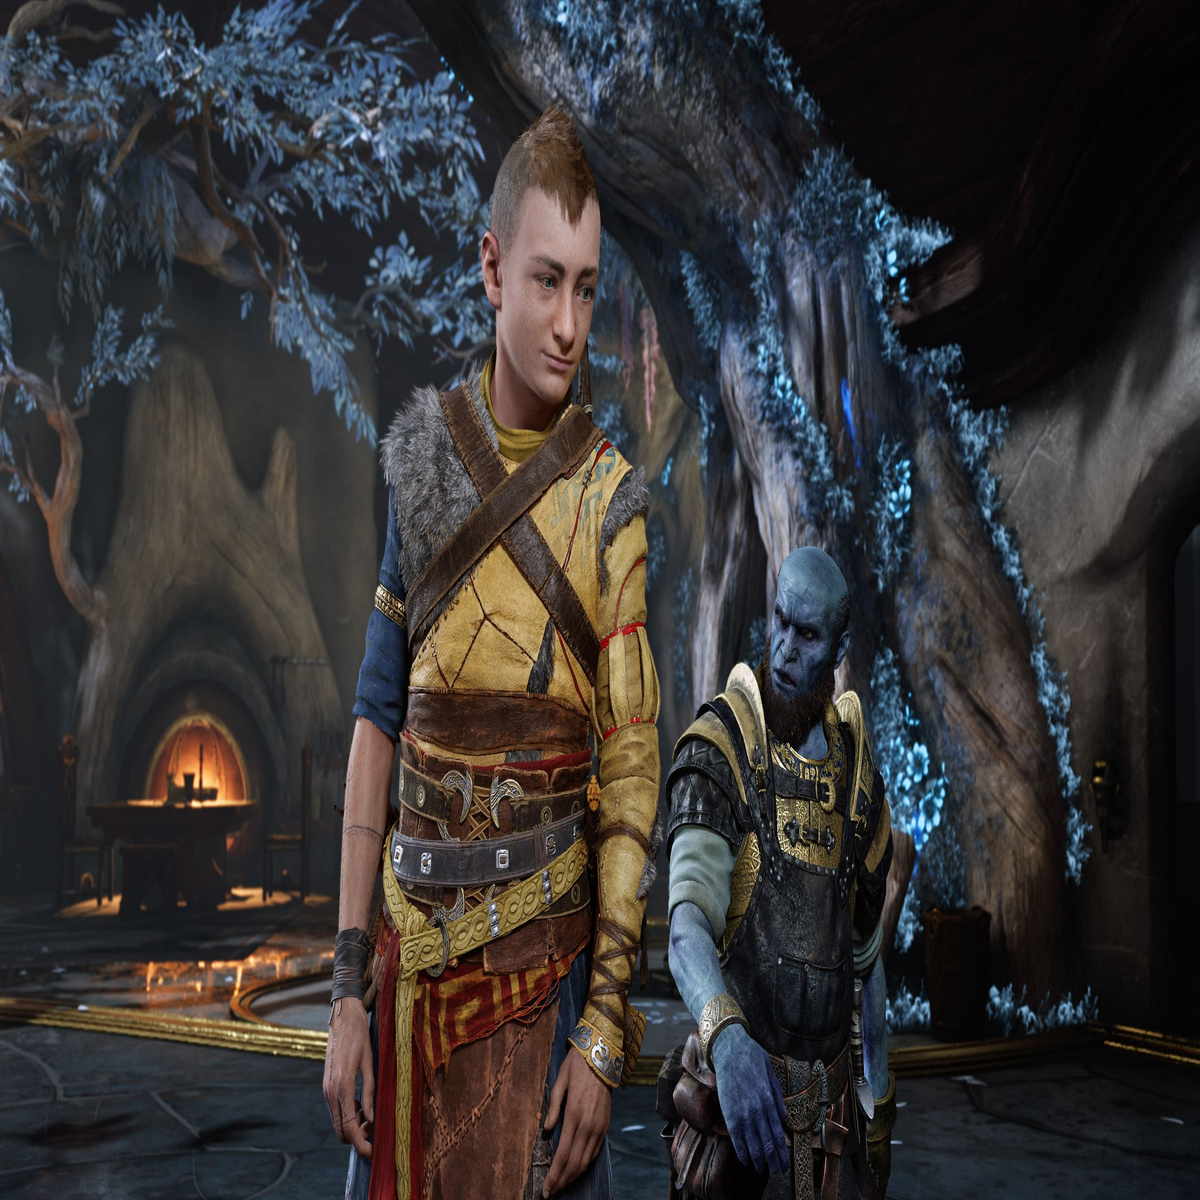 God of War Atreus got stuck in T pose - Aim is Game - The Game is On